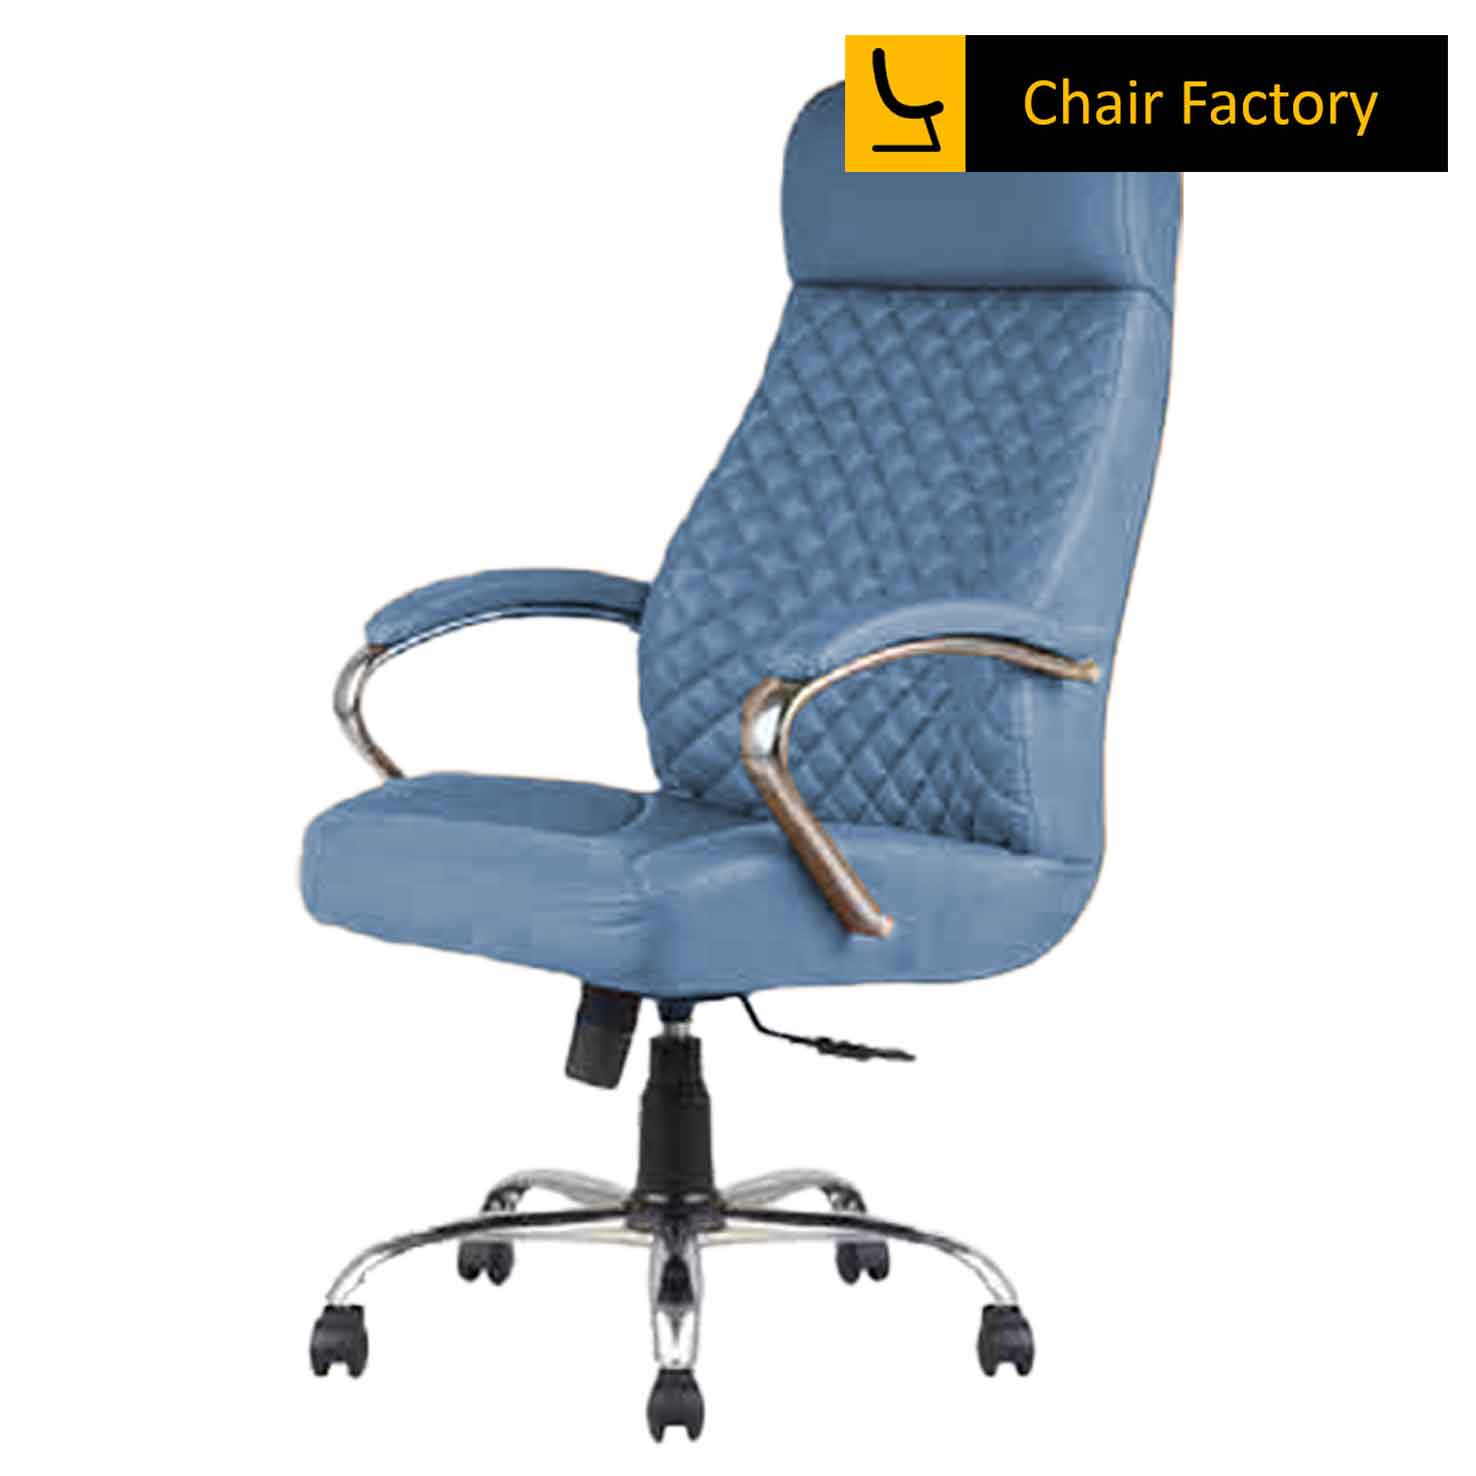 GRIFFON BLUE HIGH BACK Conference Room CHAIR